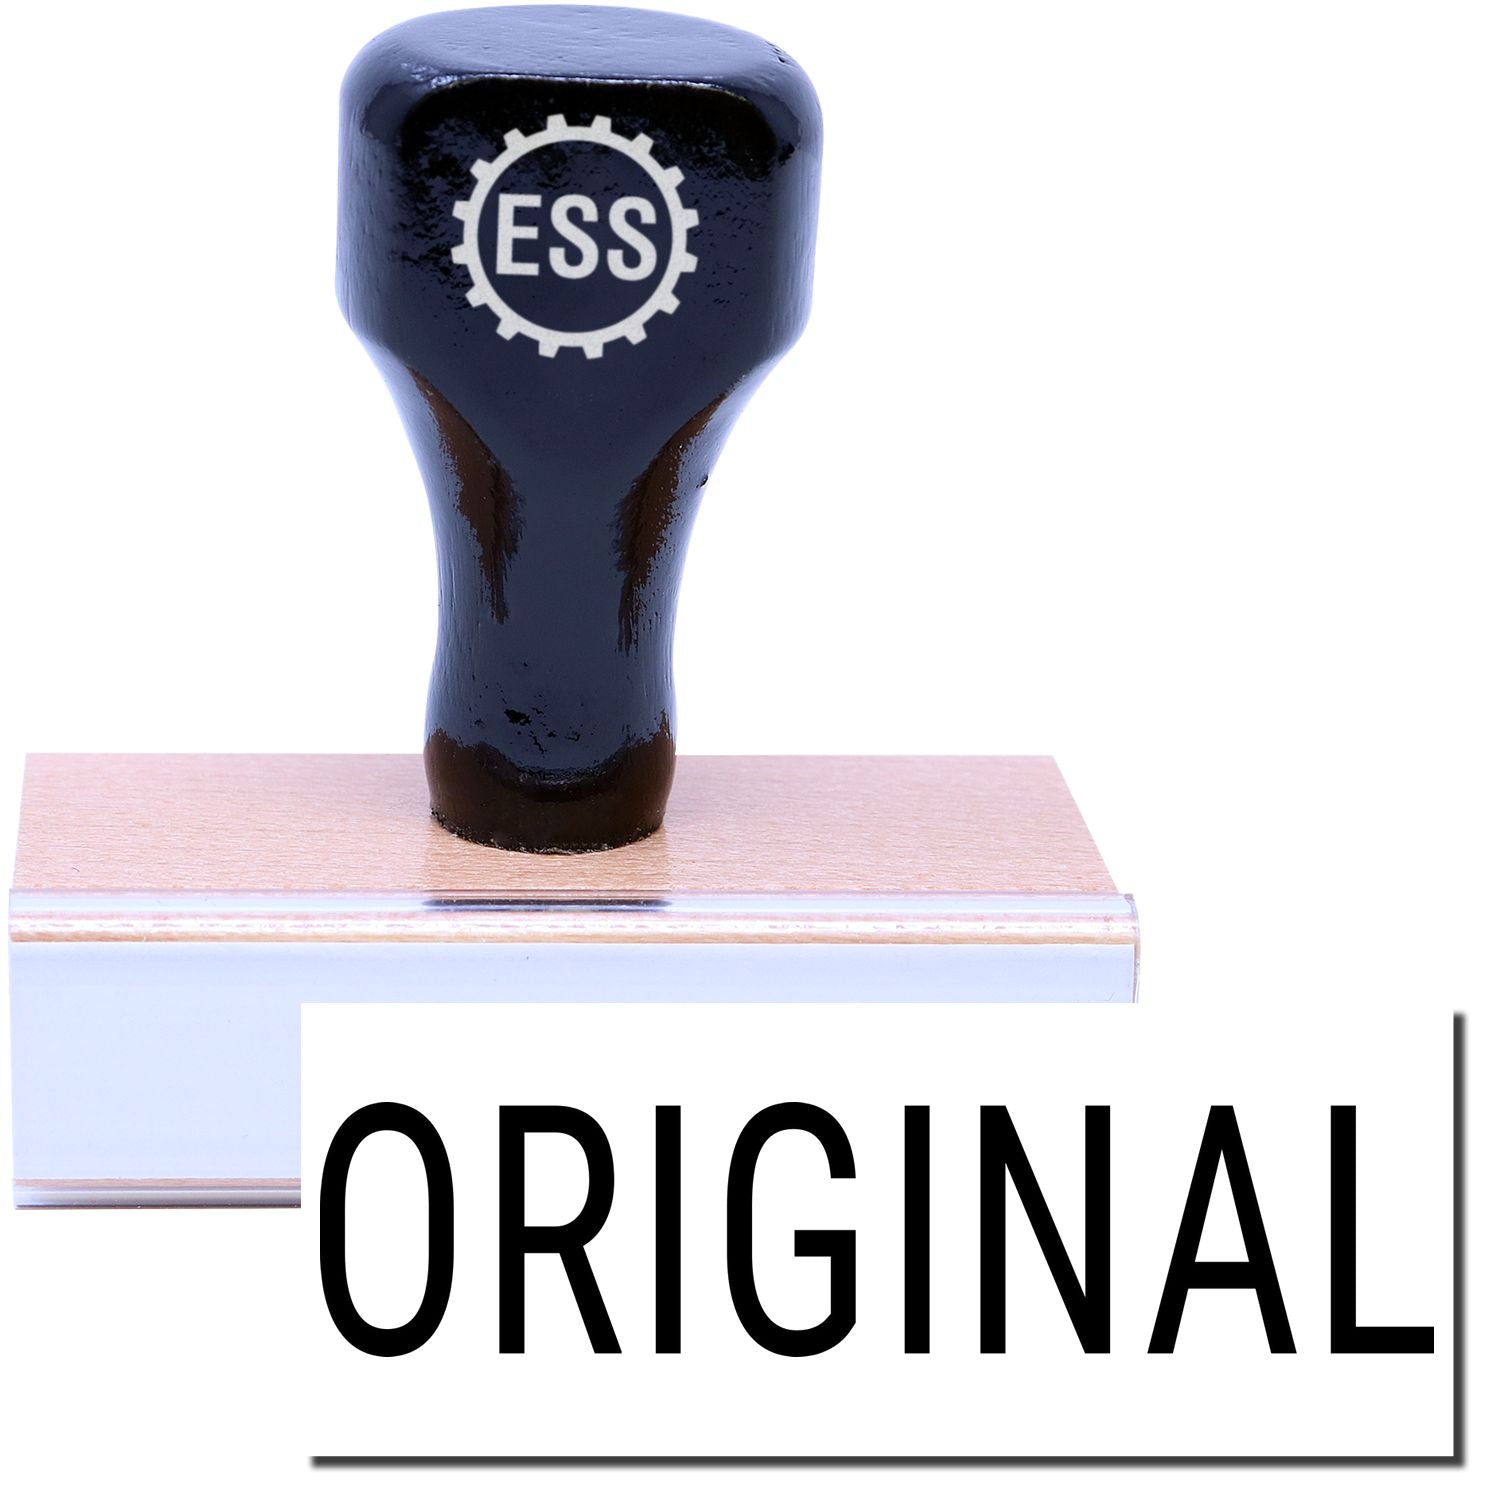 A stock office rubber stamp with a stamped image showing how the text "ORIGINAL" in a large narrow font is displayed after stamping.